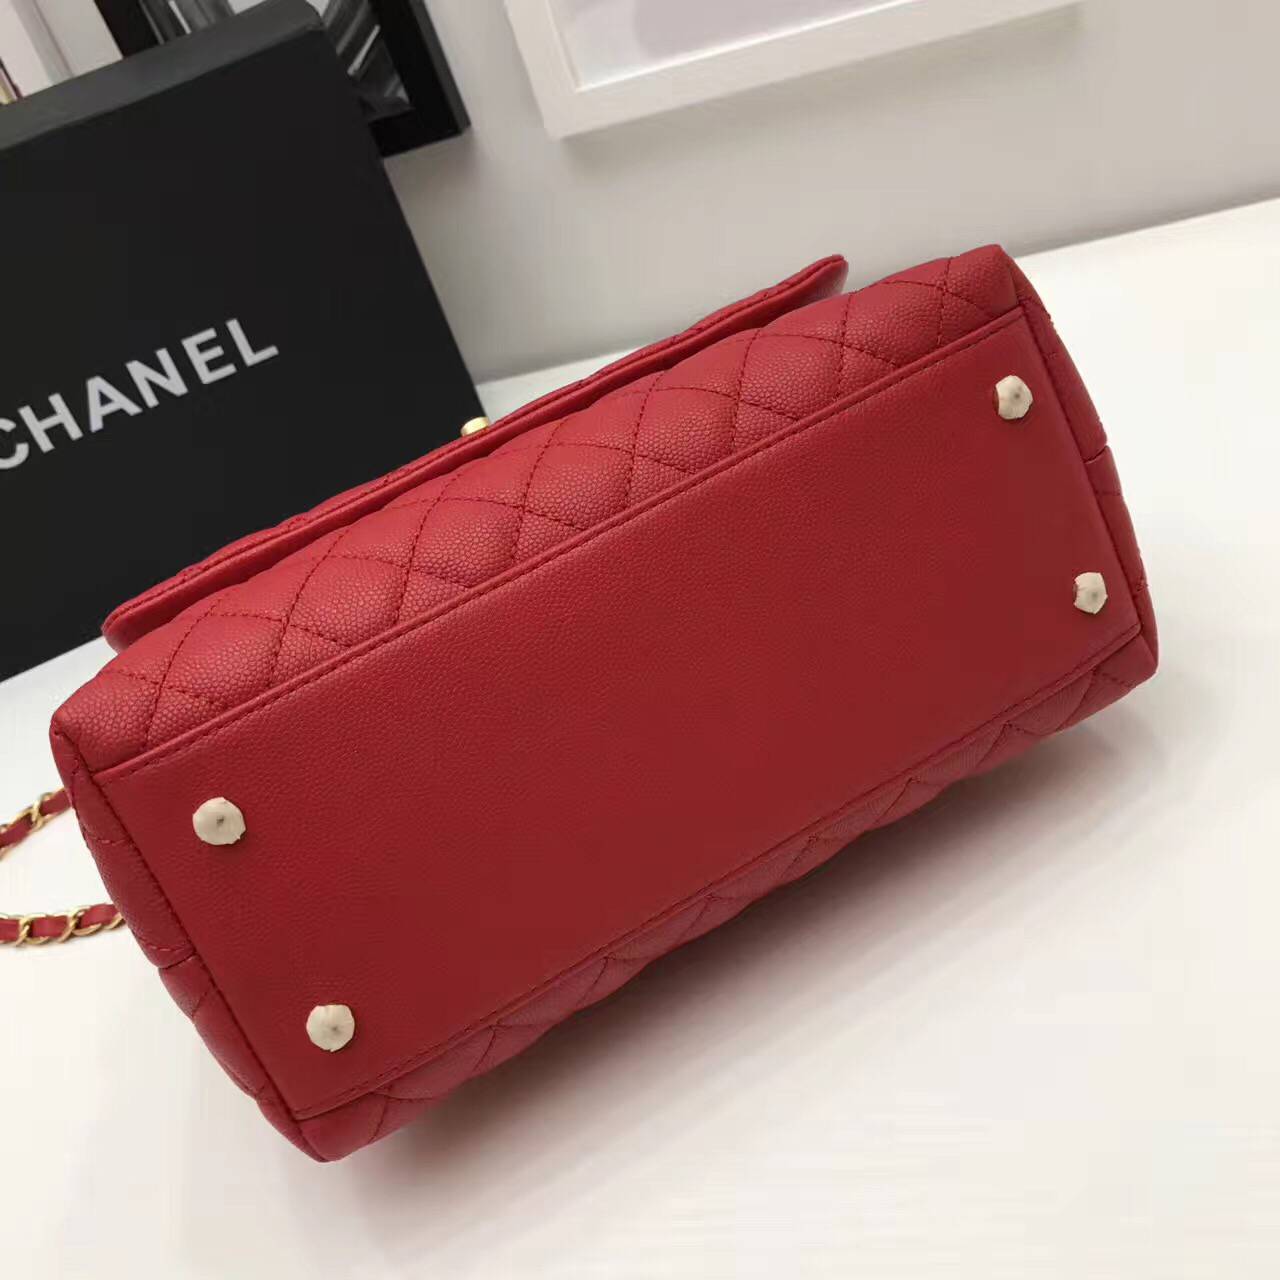 Chanel Original Leather Tote Bag 95478 Red